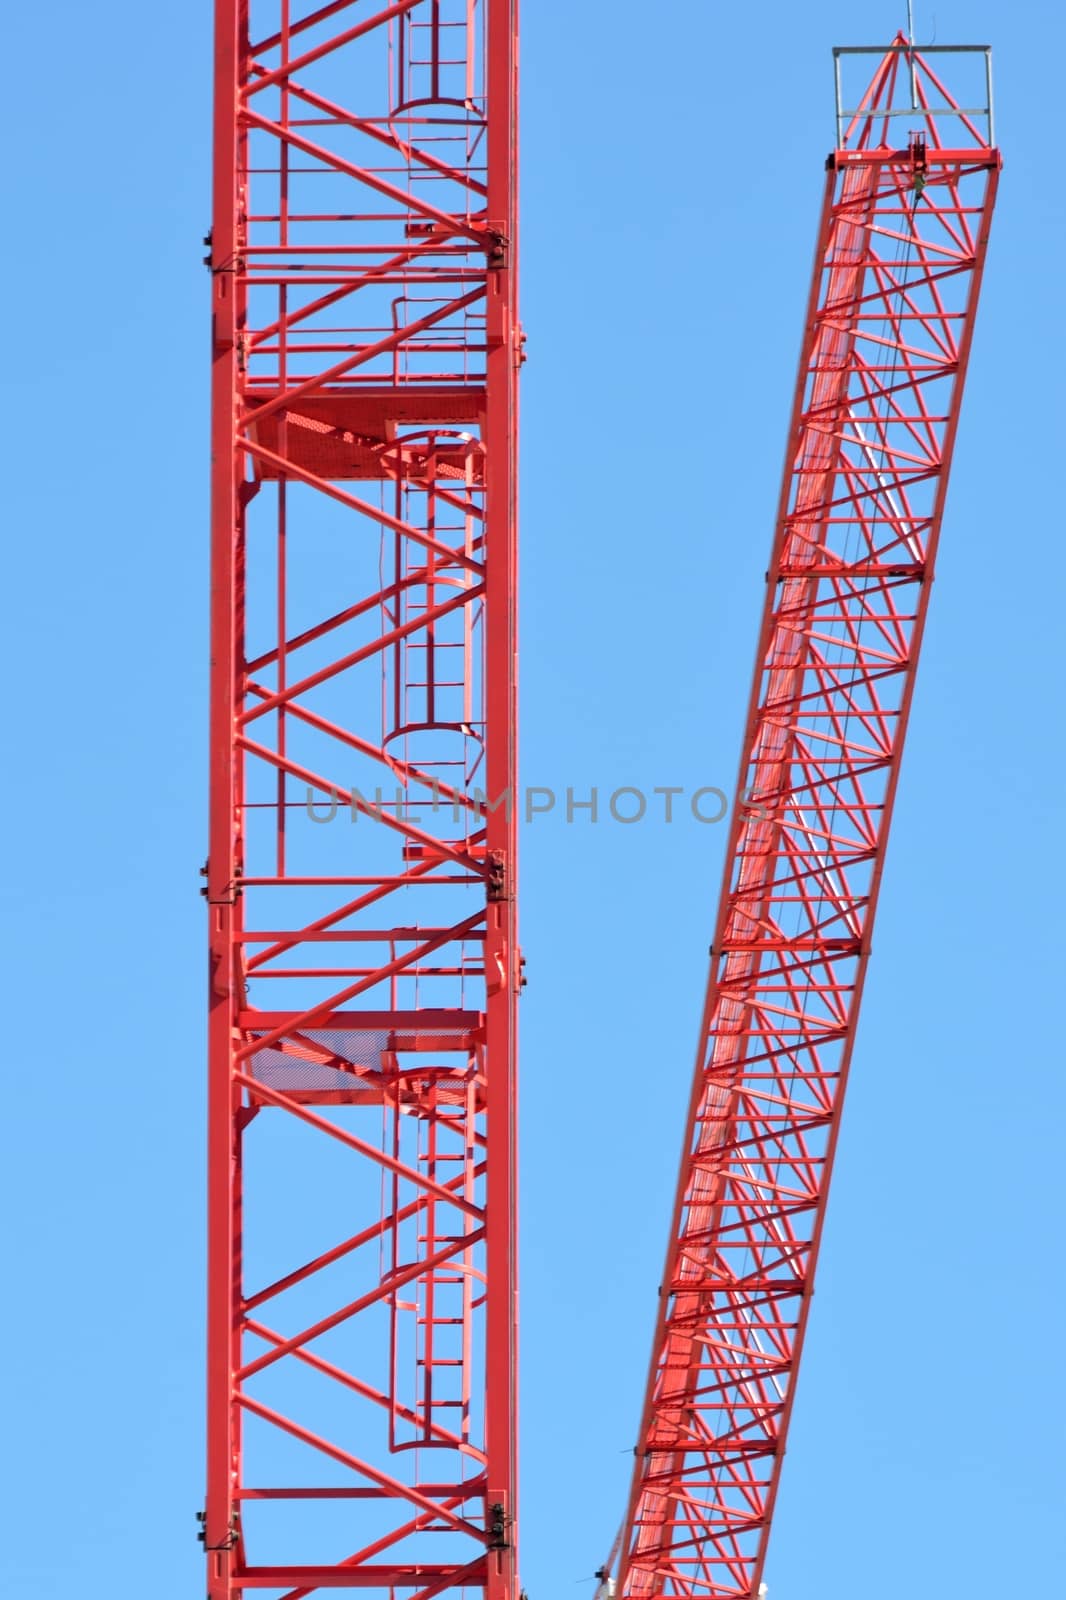 Large red crane detail by pauws99